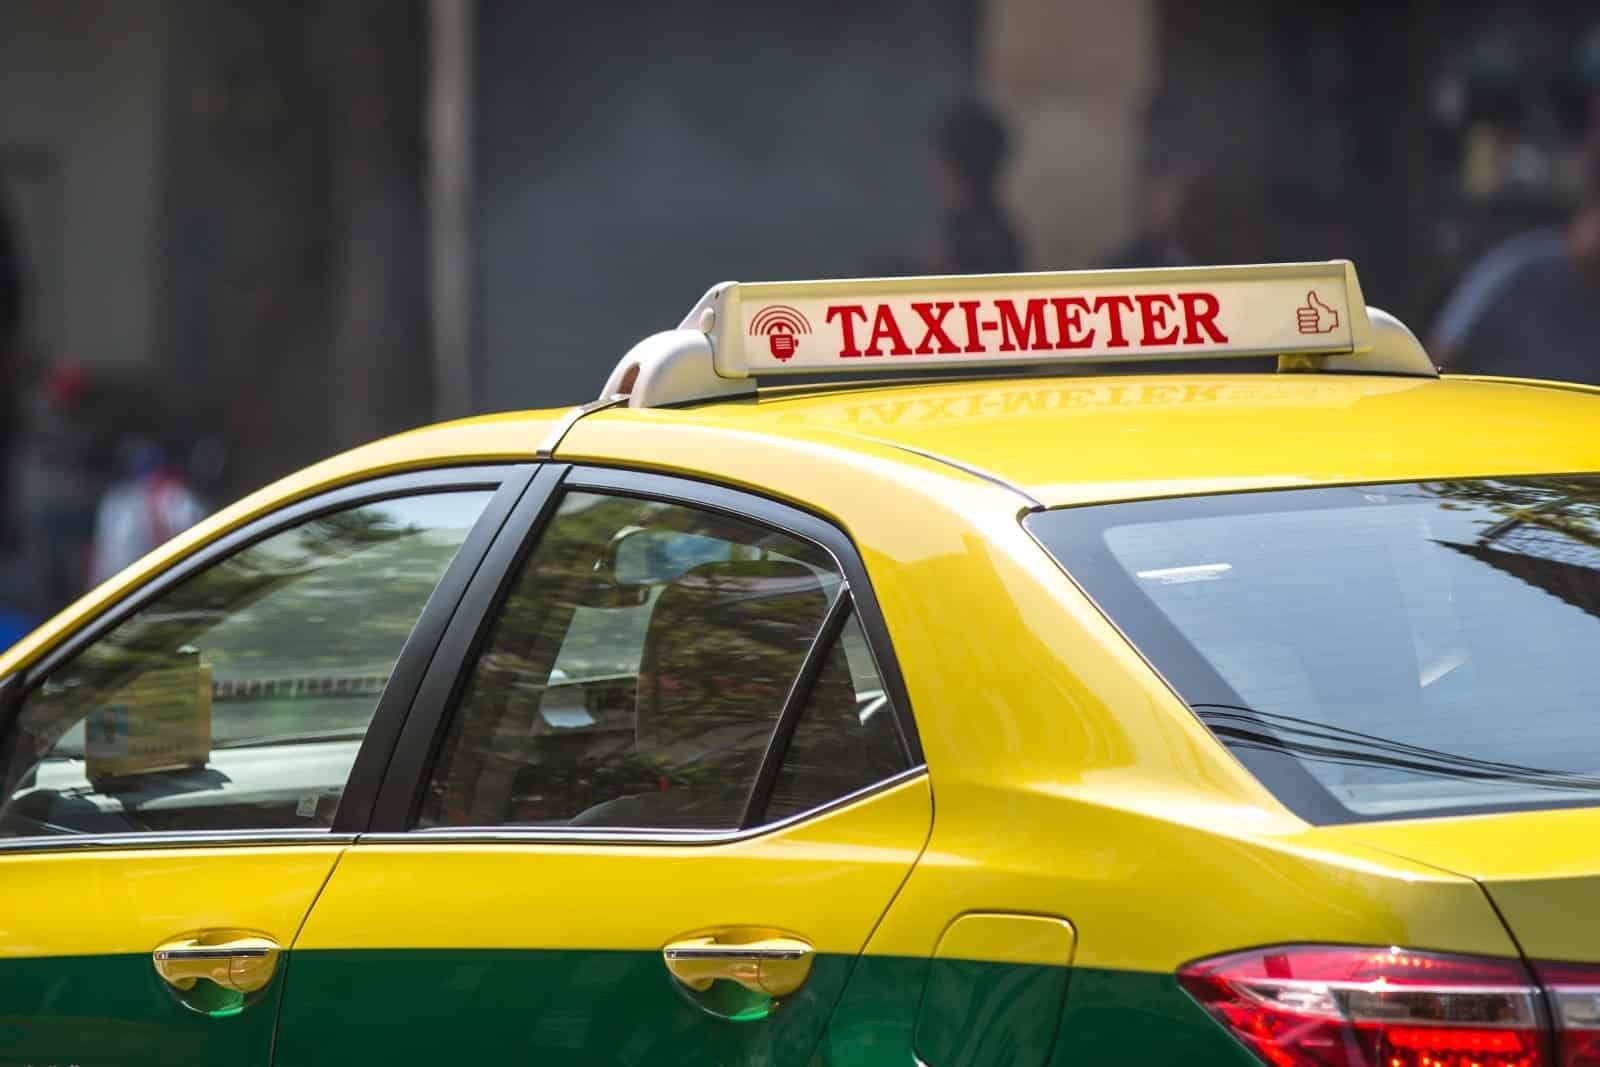 <p class="wp-caption-text">Image Credit: Shutterstock / CatwalkPhotos</p>  <p><span>Taxi scams are a pervasive issue travelers encounter worldwide, exploiting the need for reliable transportation in unfamiliar locales. Unscrupulous drivers may employ various tactics to inflate fares, including taking unnecessarily long routes, claiming fixed rates are mandatory for tourists, or manipulating the taxi meter to charge exorbitant prices.</span></p>